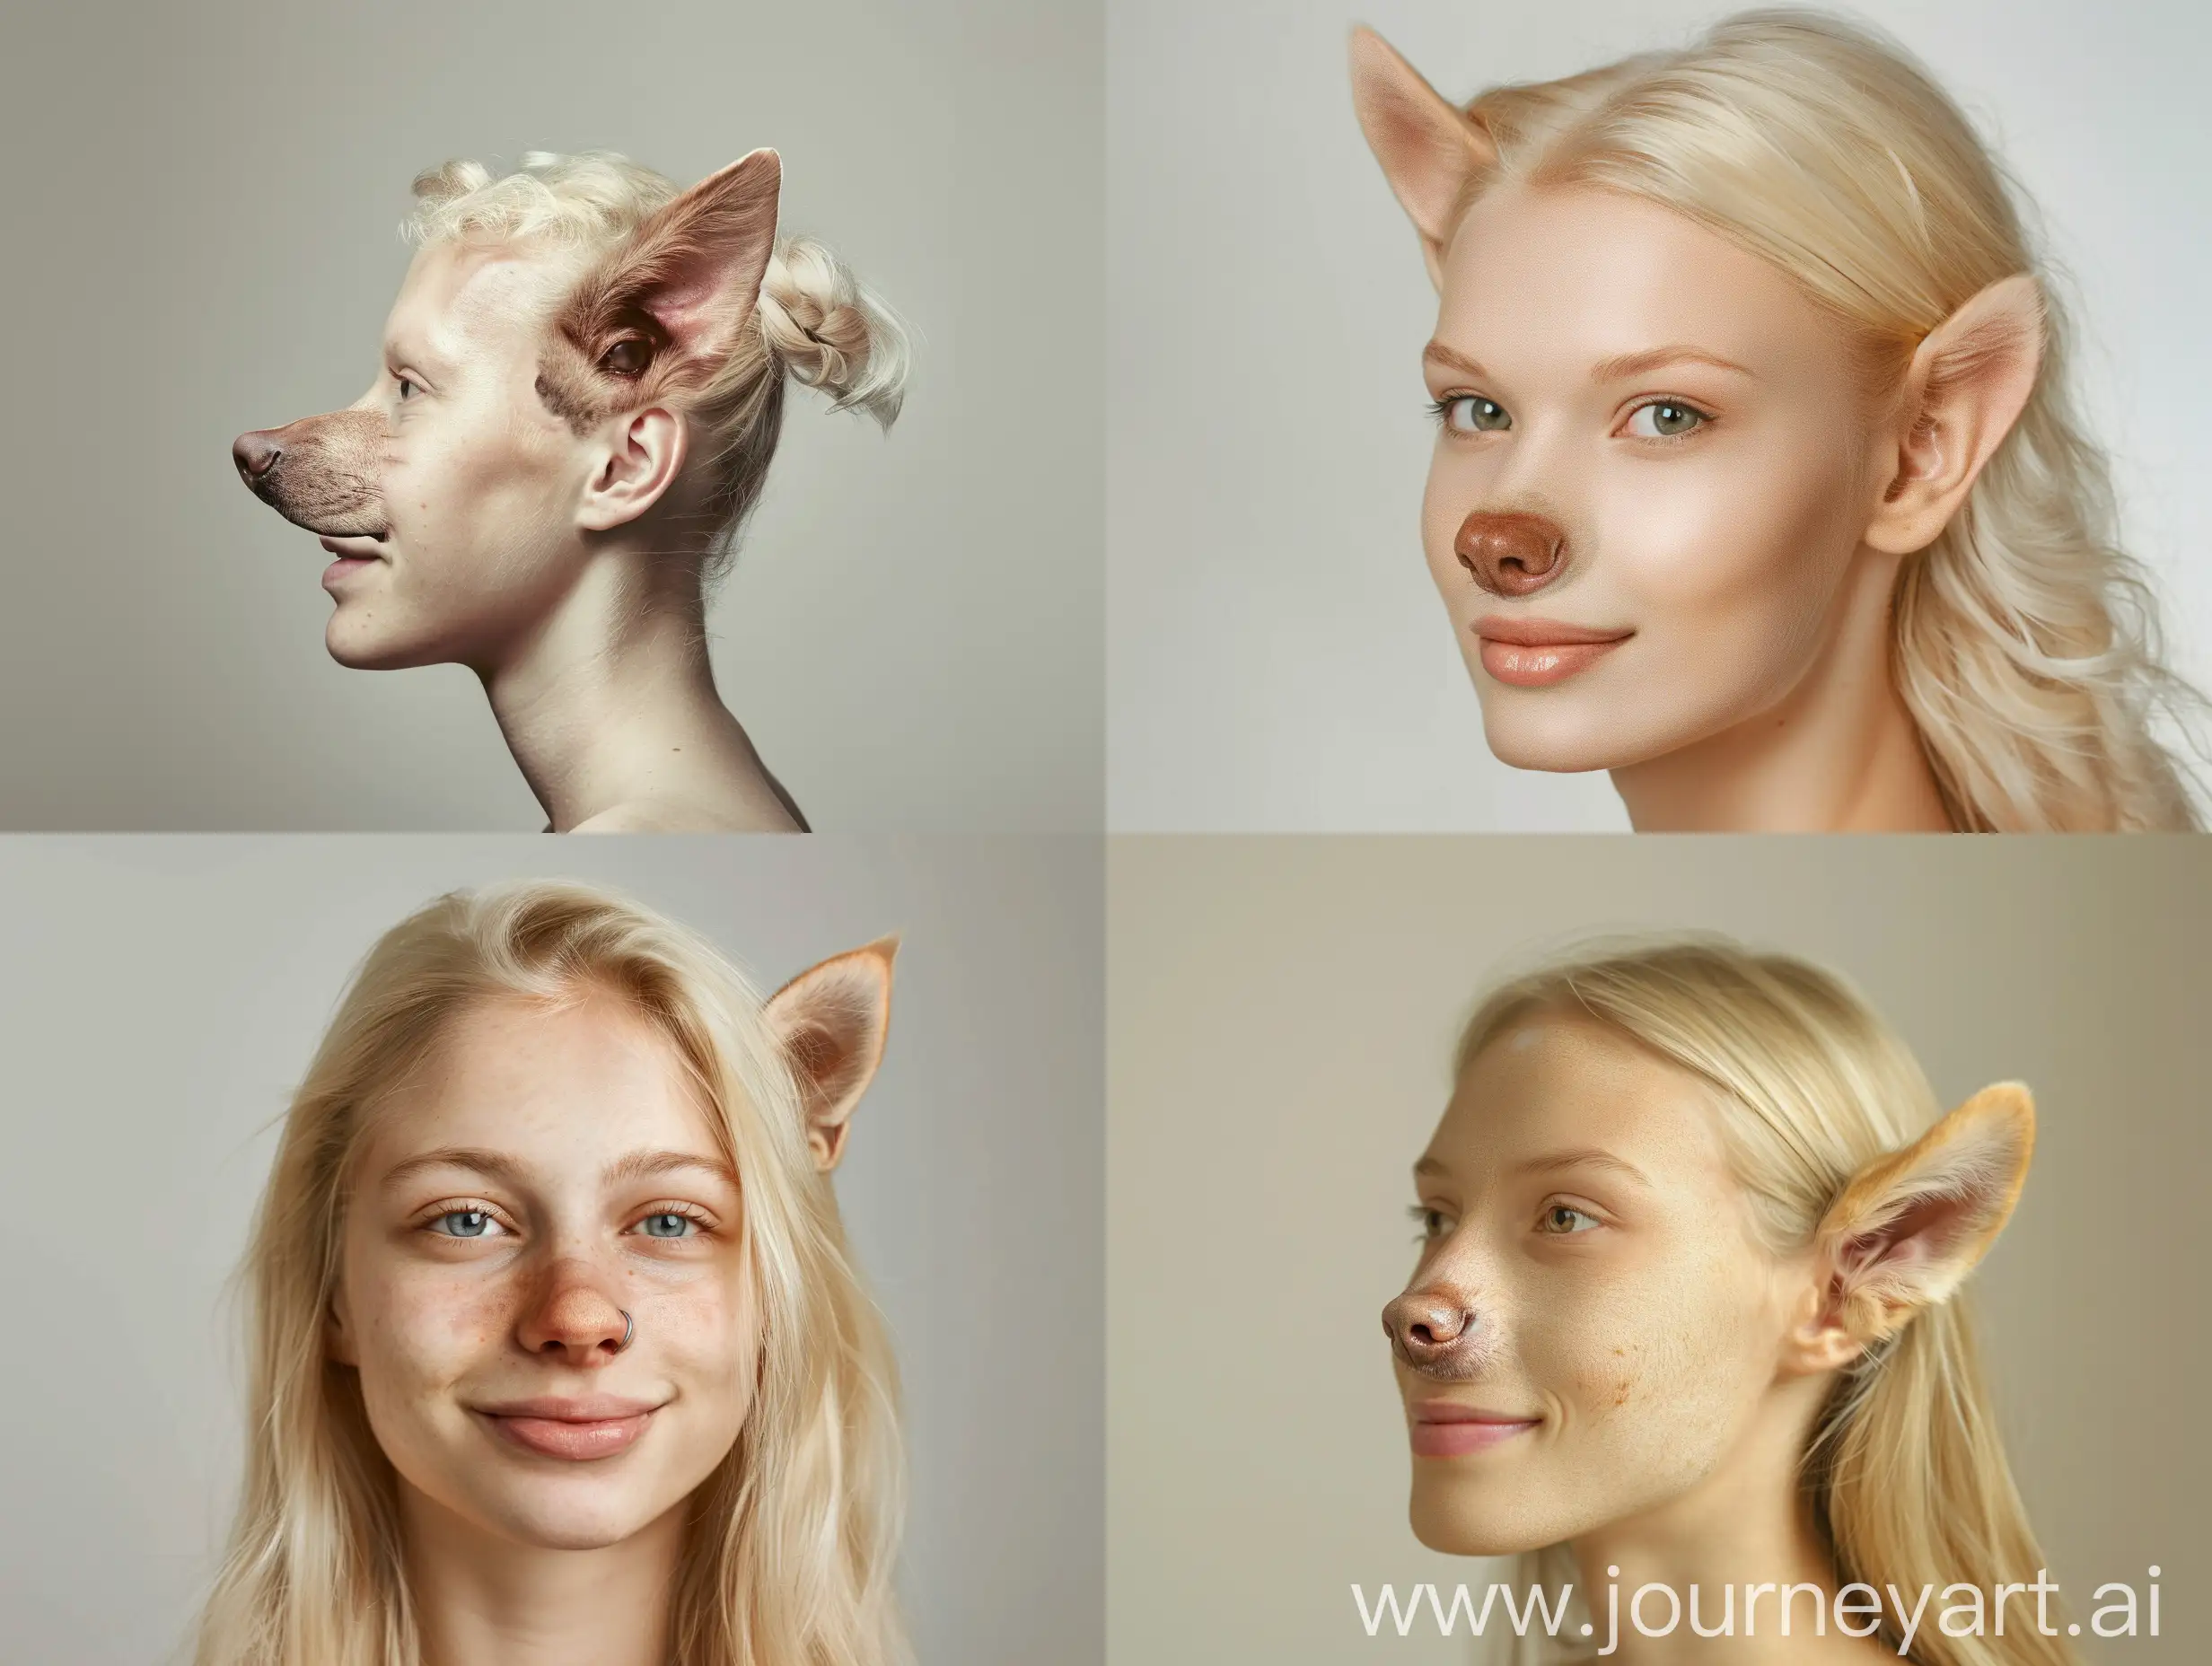 Blonde-Woman-with-Doglike-Nose-and-Sharp-Ears-Smiling